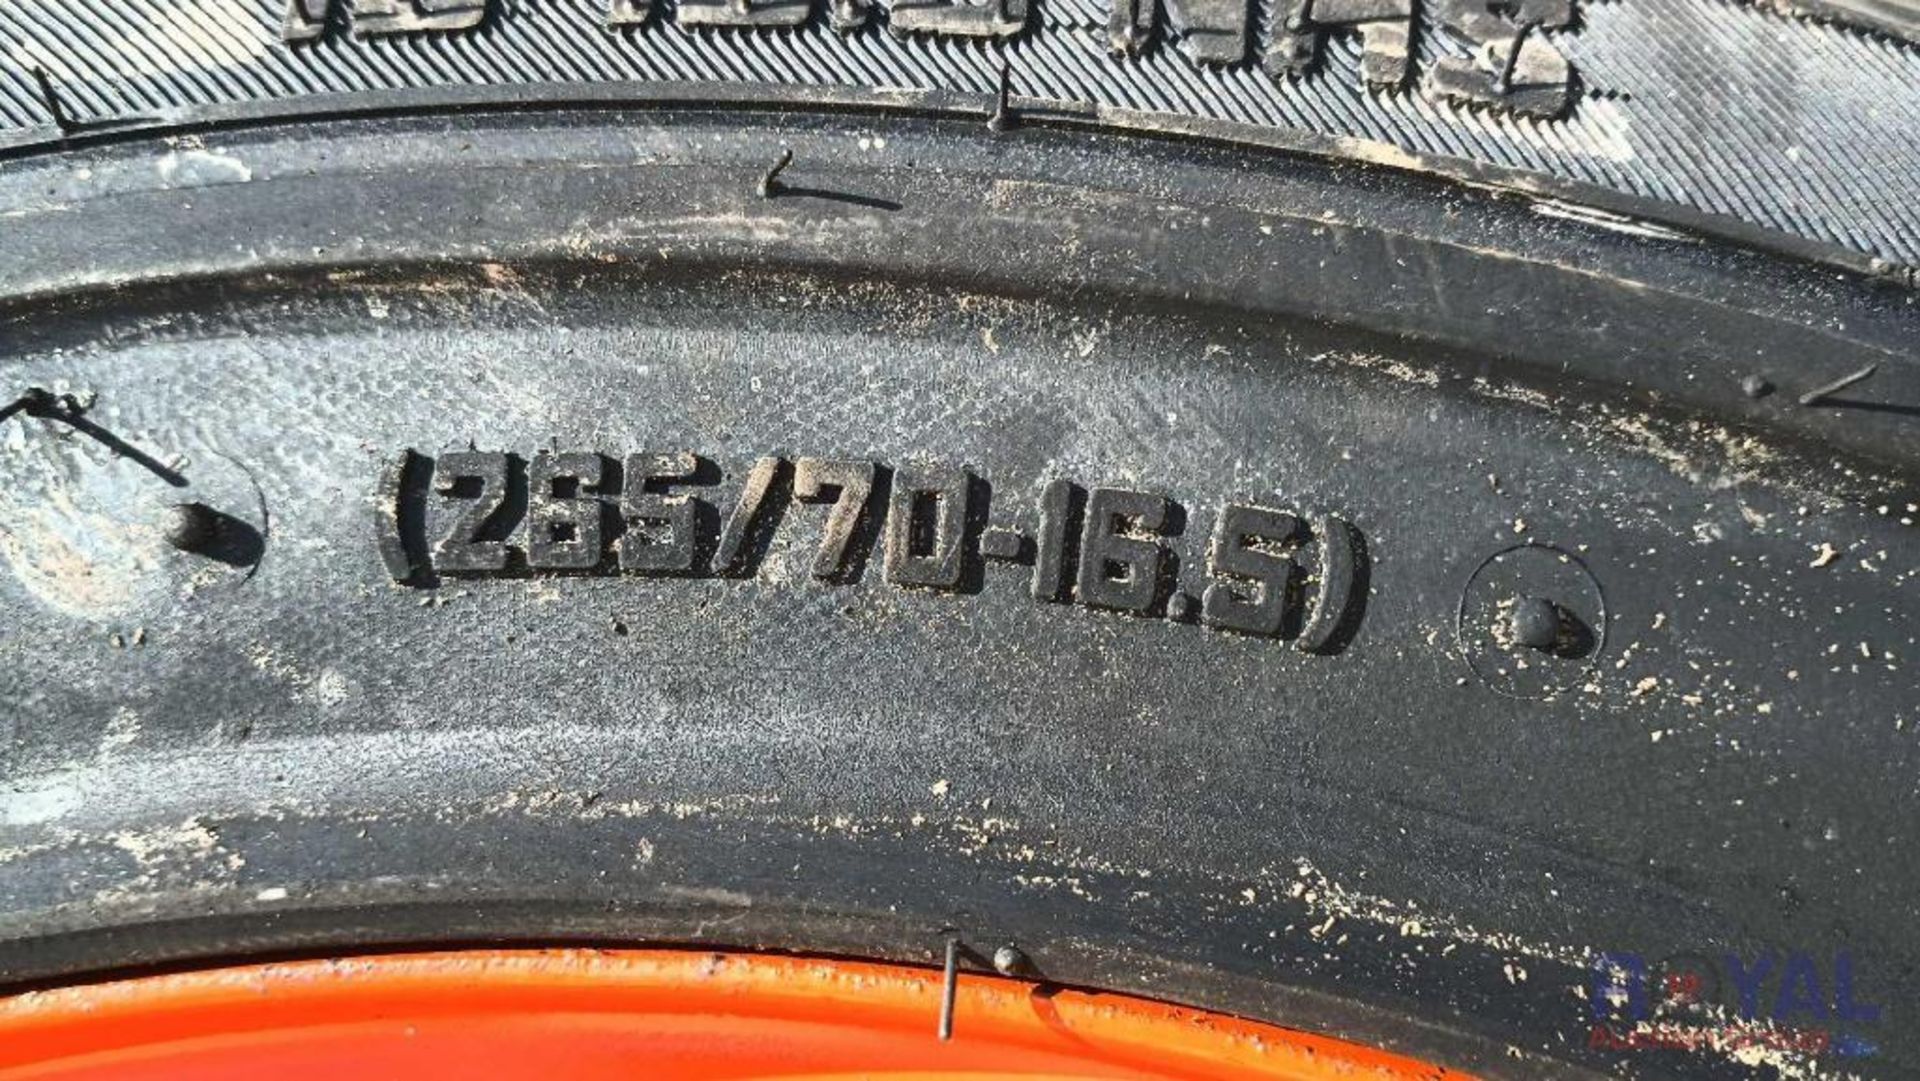 4-Unused 255/70-16.5 Tires and Wheels - Image 3 of 6